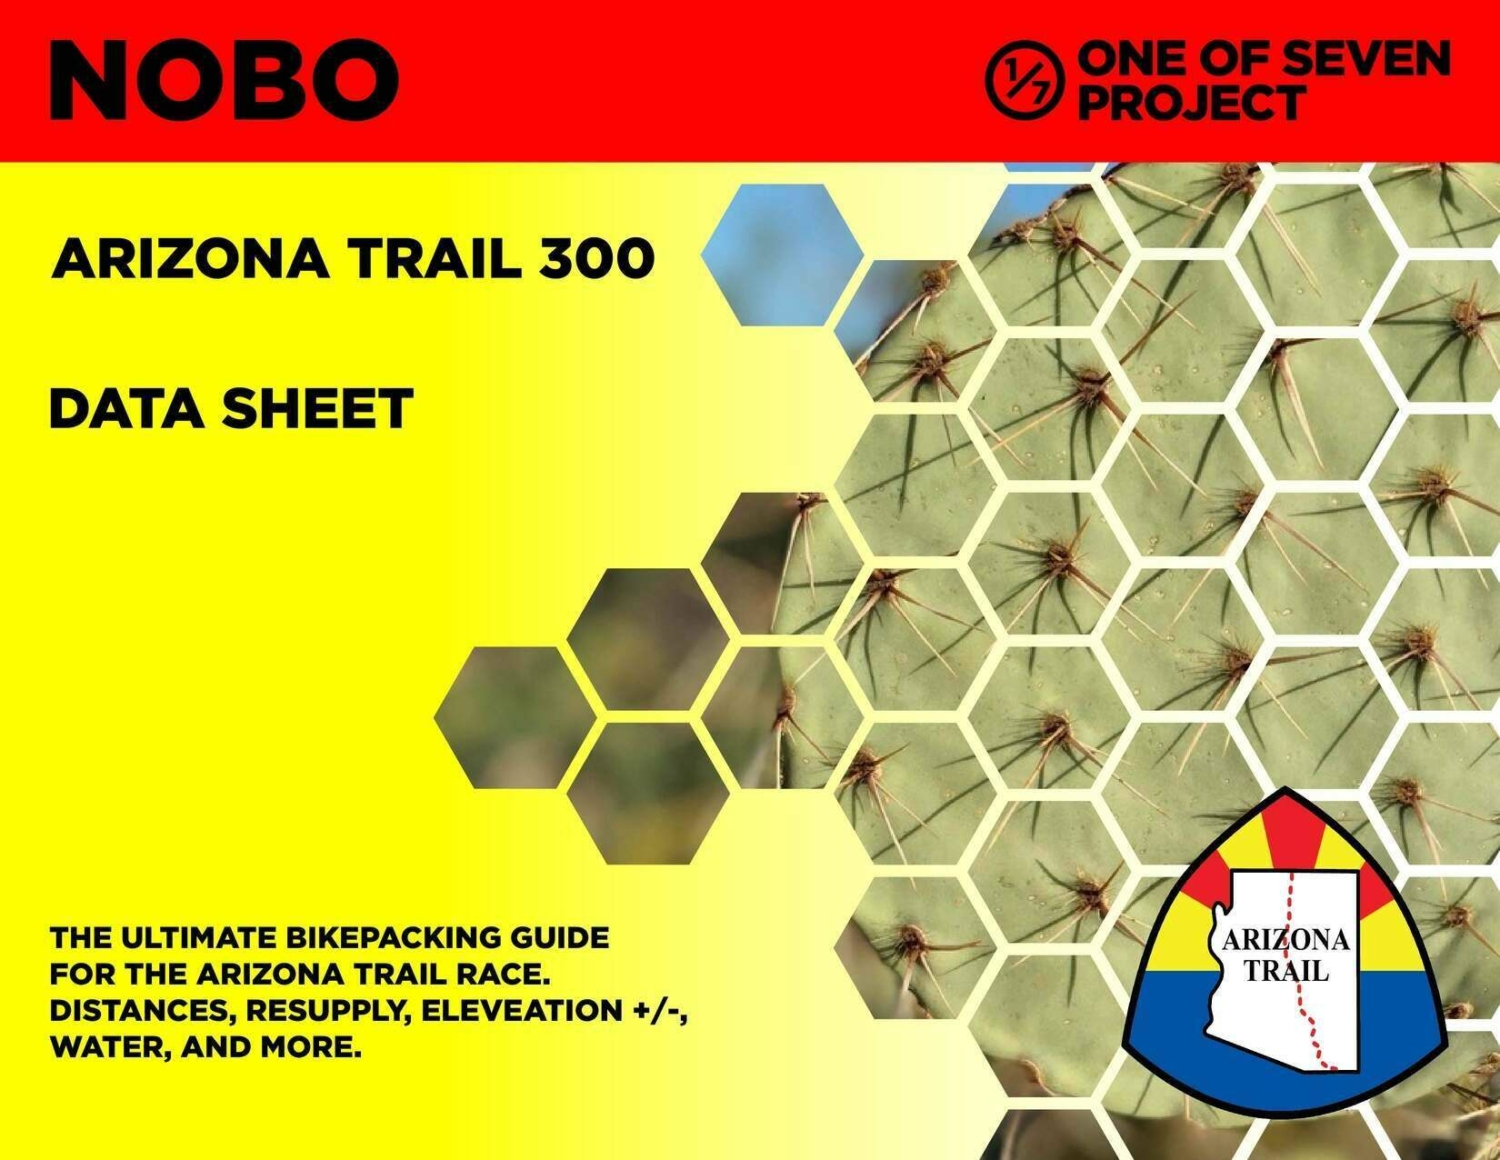 AZTR 300 NOBO Data Sheet cover, planning aid, bikepacking, guides